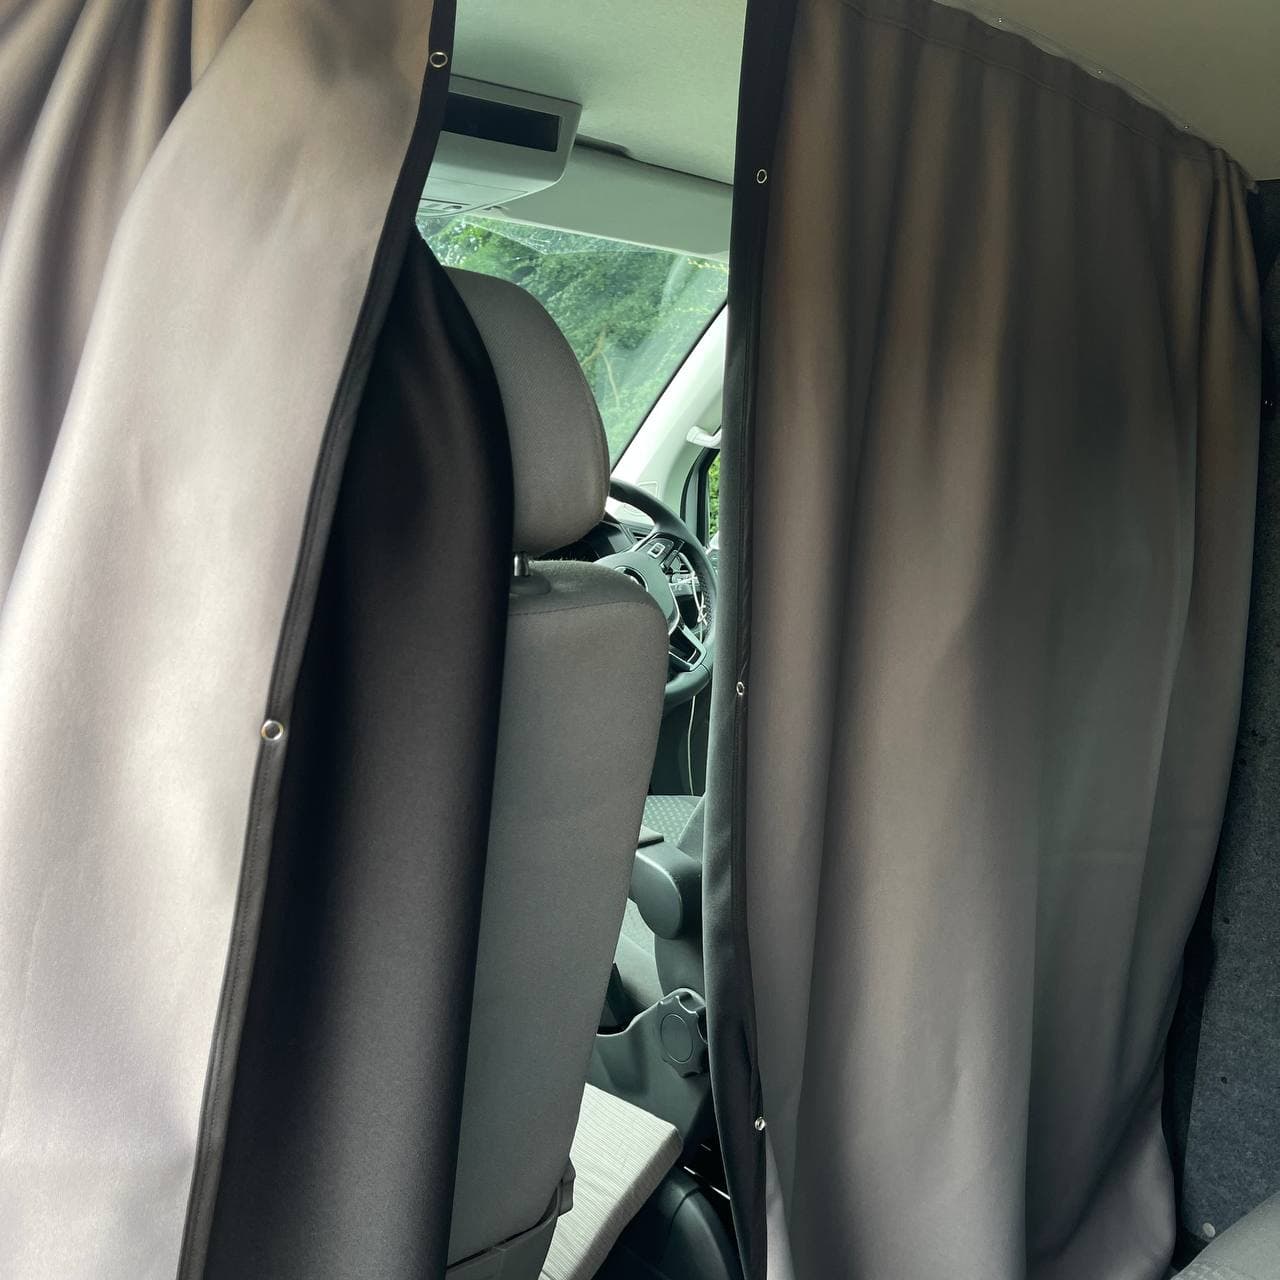 VW Crafter Cab Divider Curtain Kit